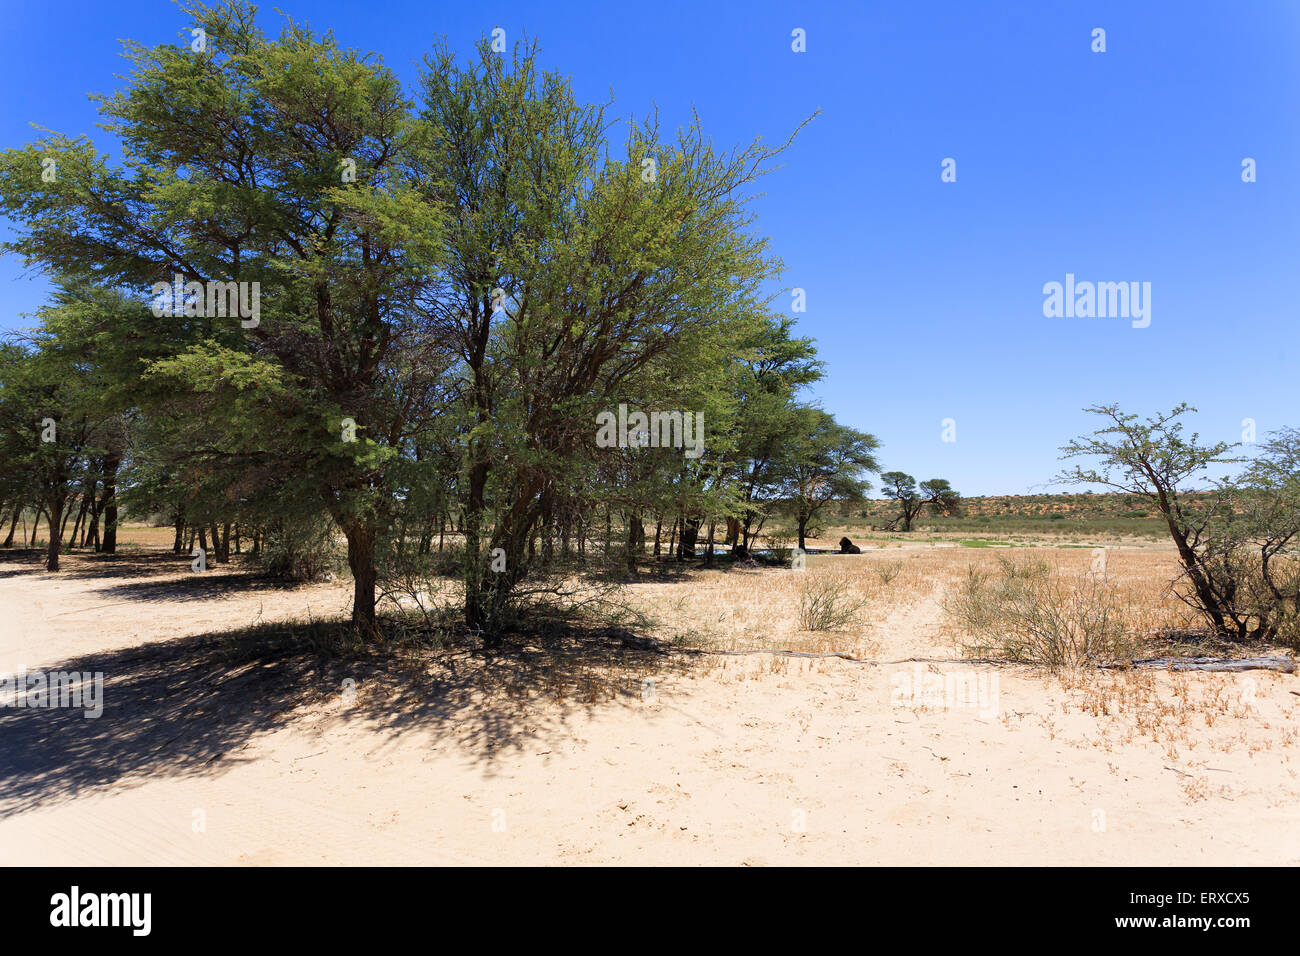 Panorama con Lion dal Kgalagadi National Park, Sud Africa Foto Stock